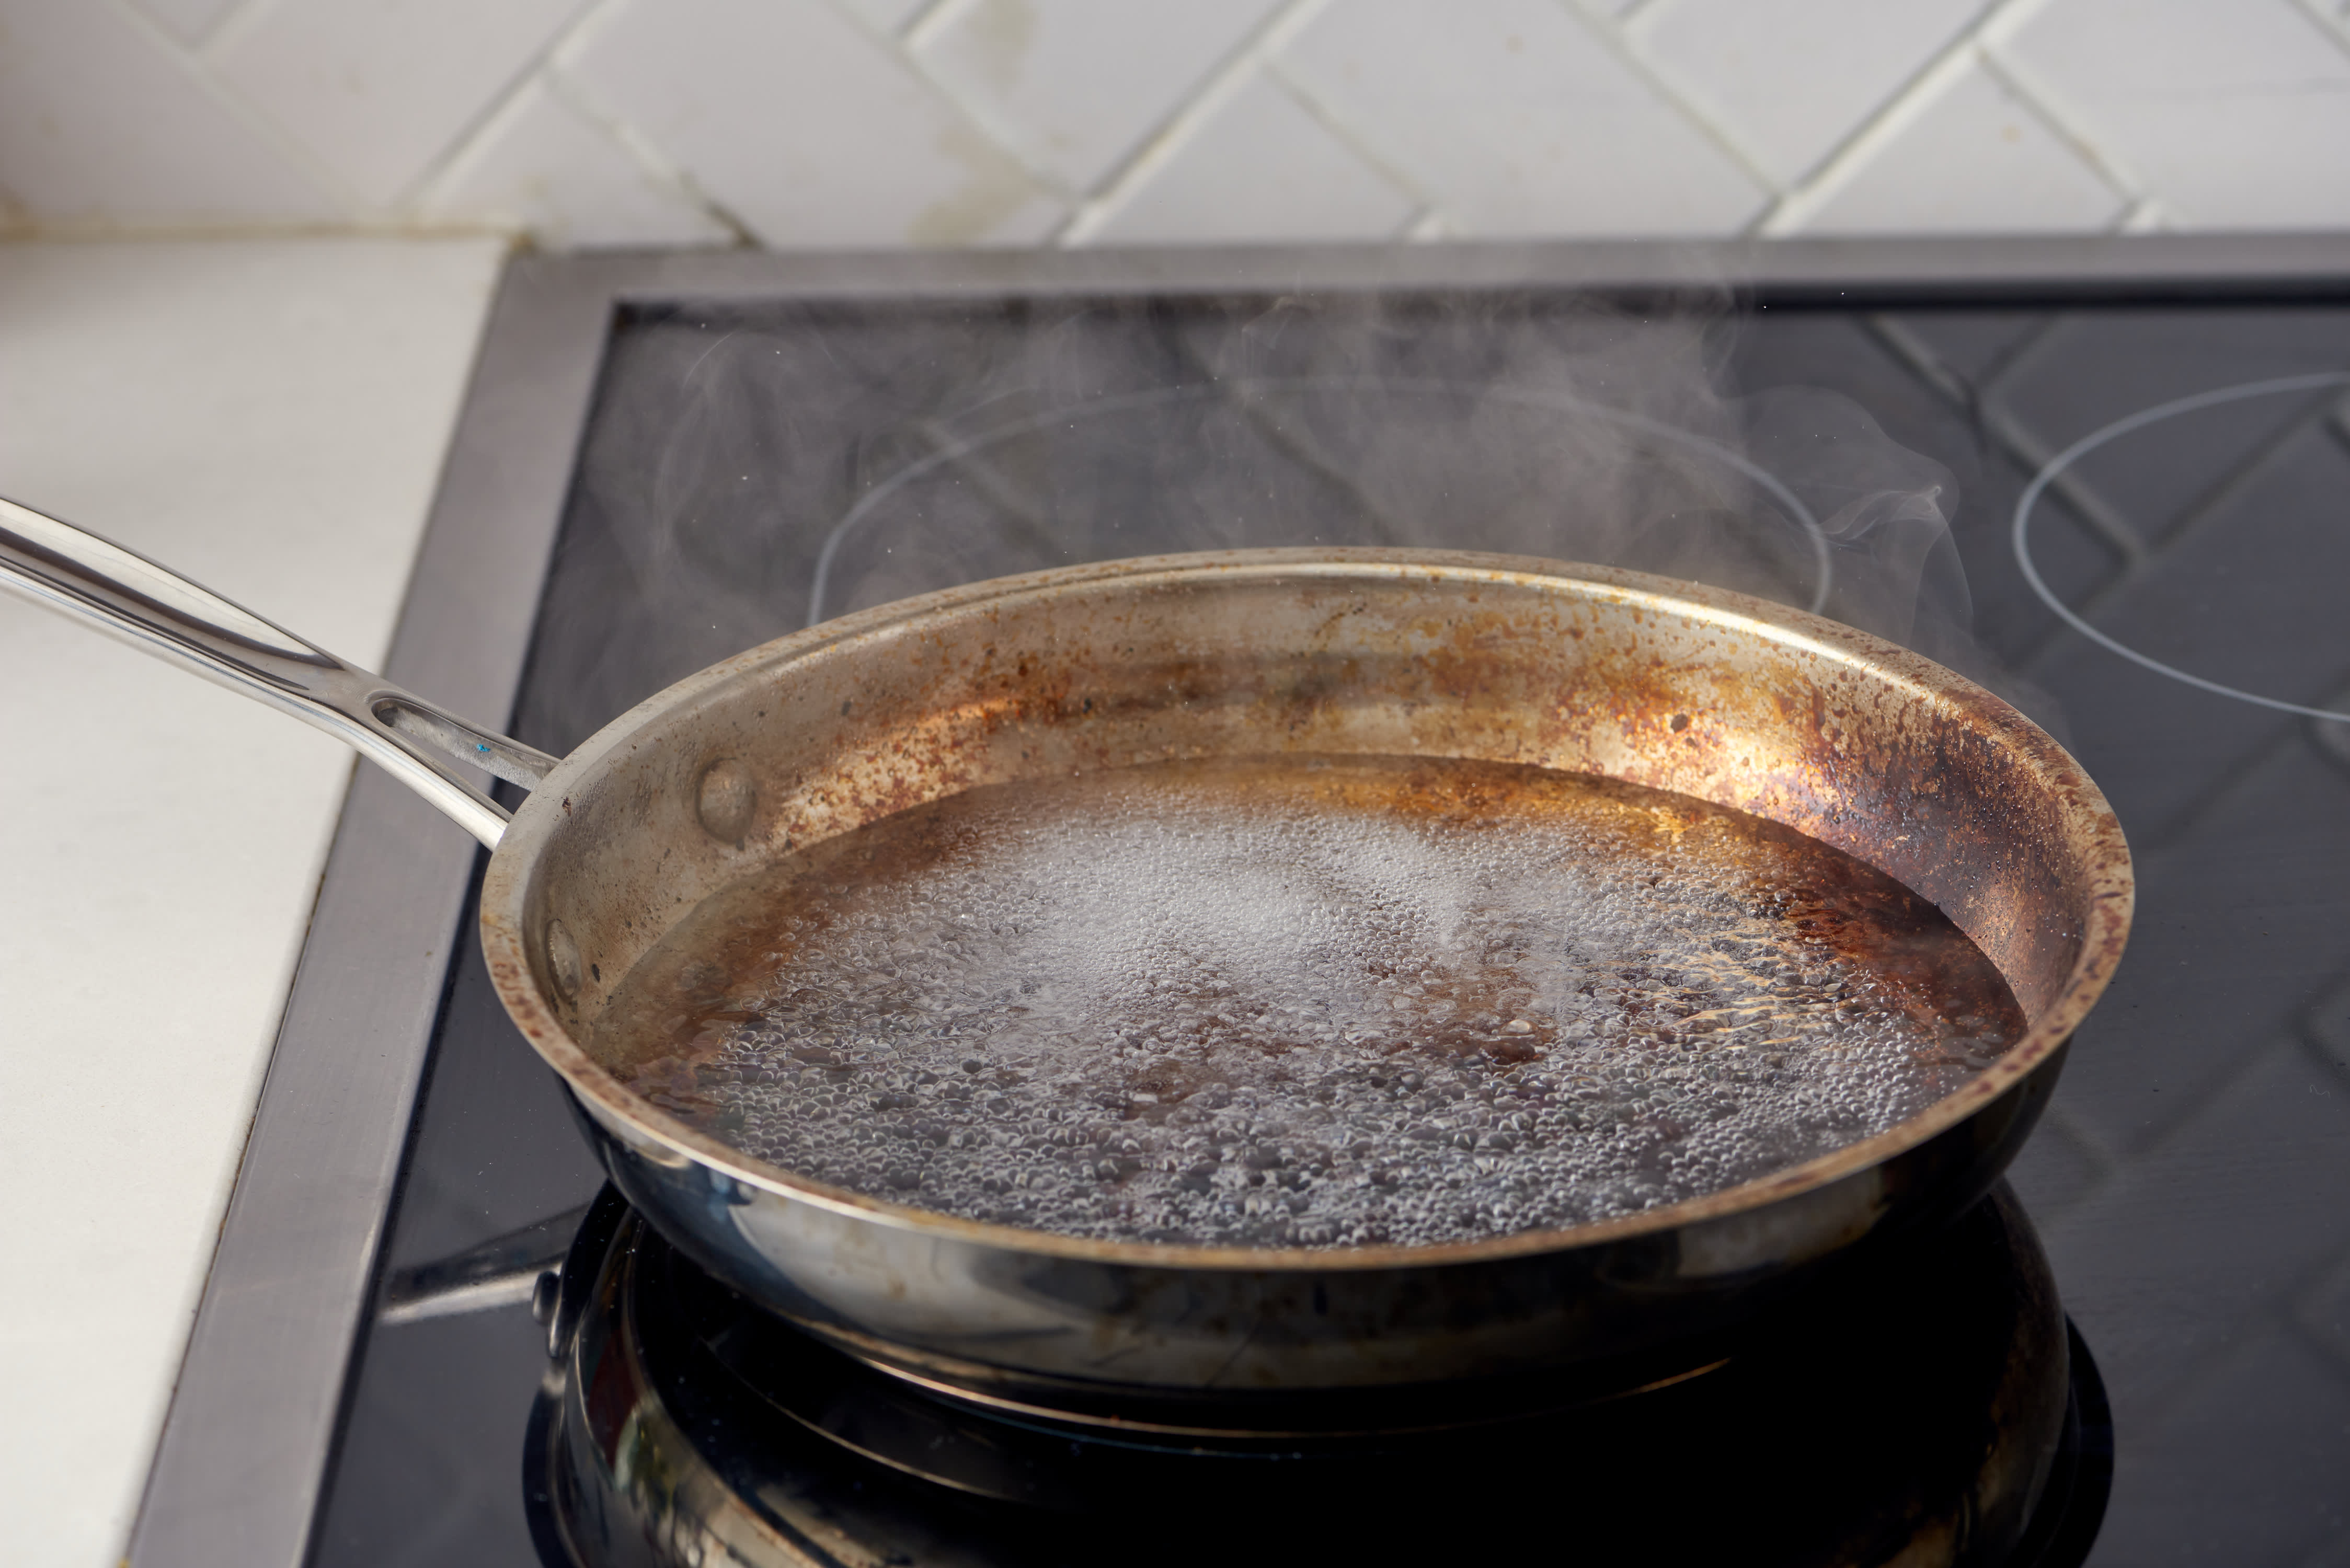 How to Clean a Burnt Pot or Pan - How Do You Clean Scorched